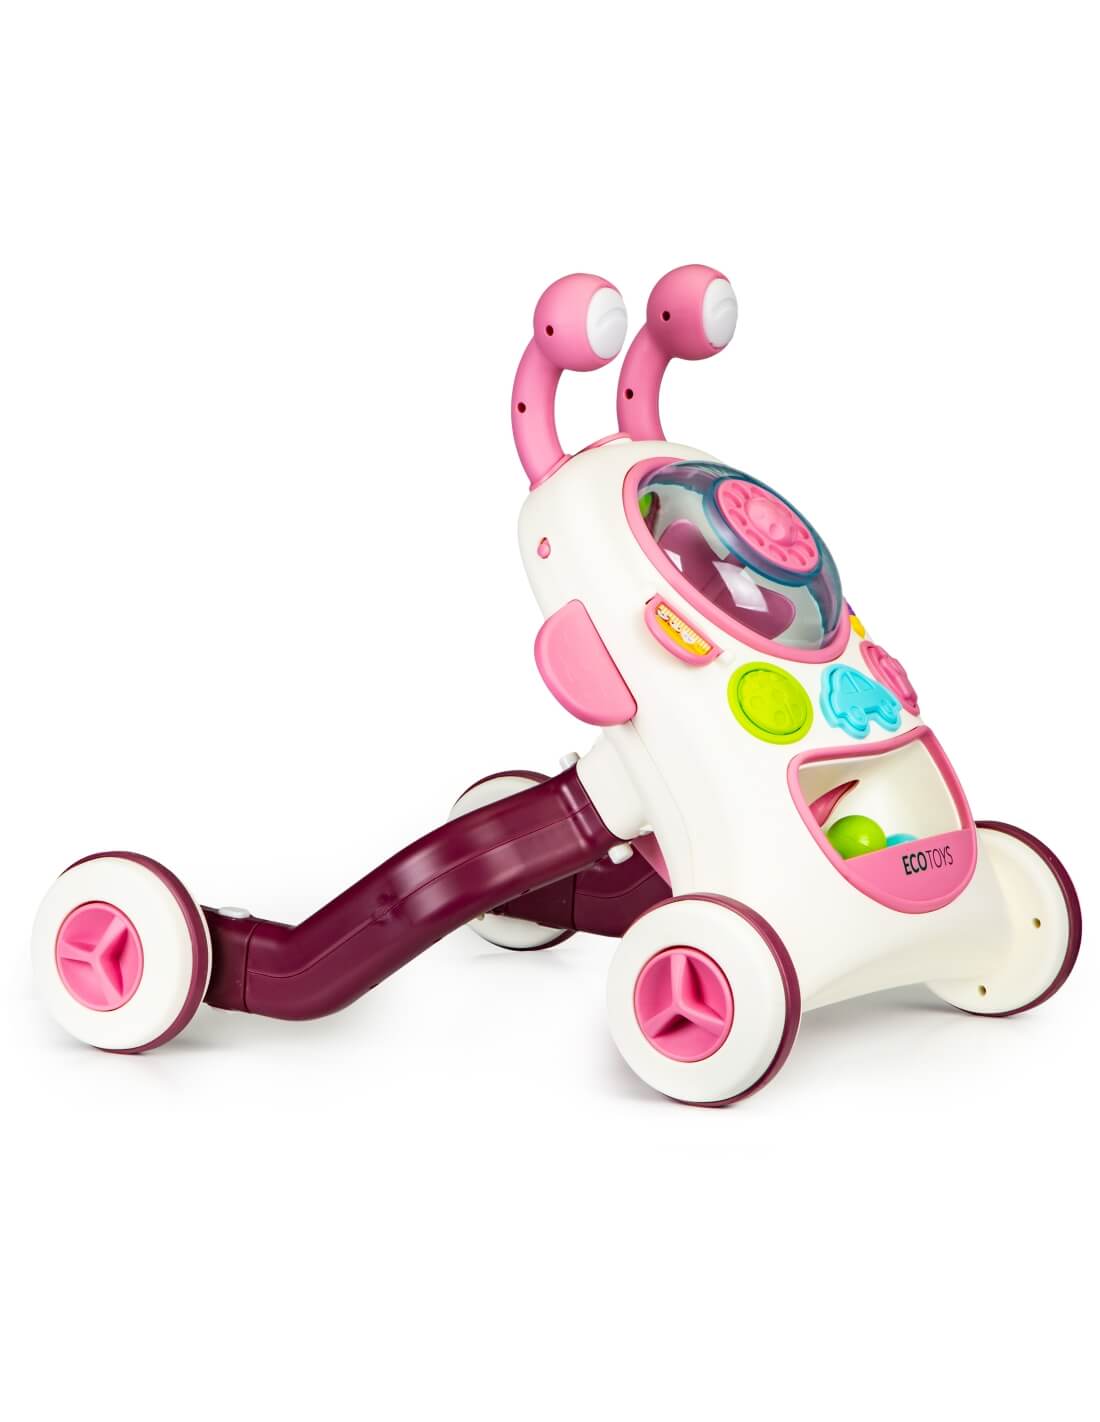  Bug zone interactive ride-on led sound walker